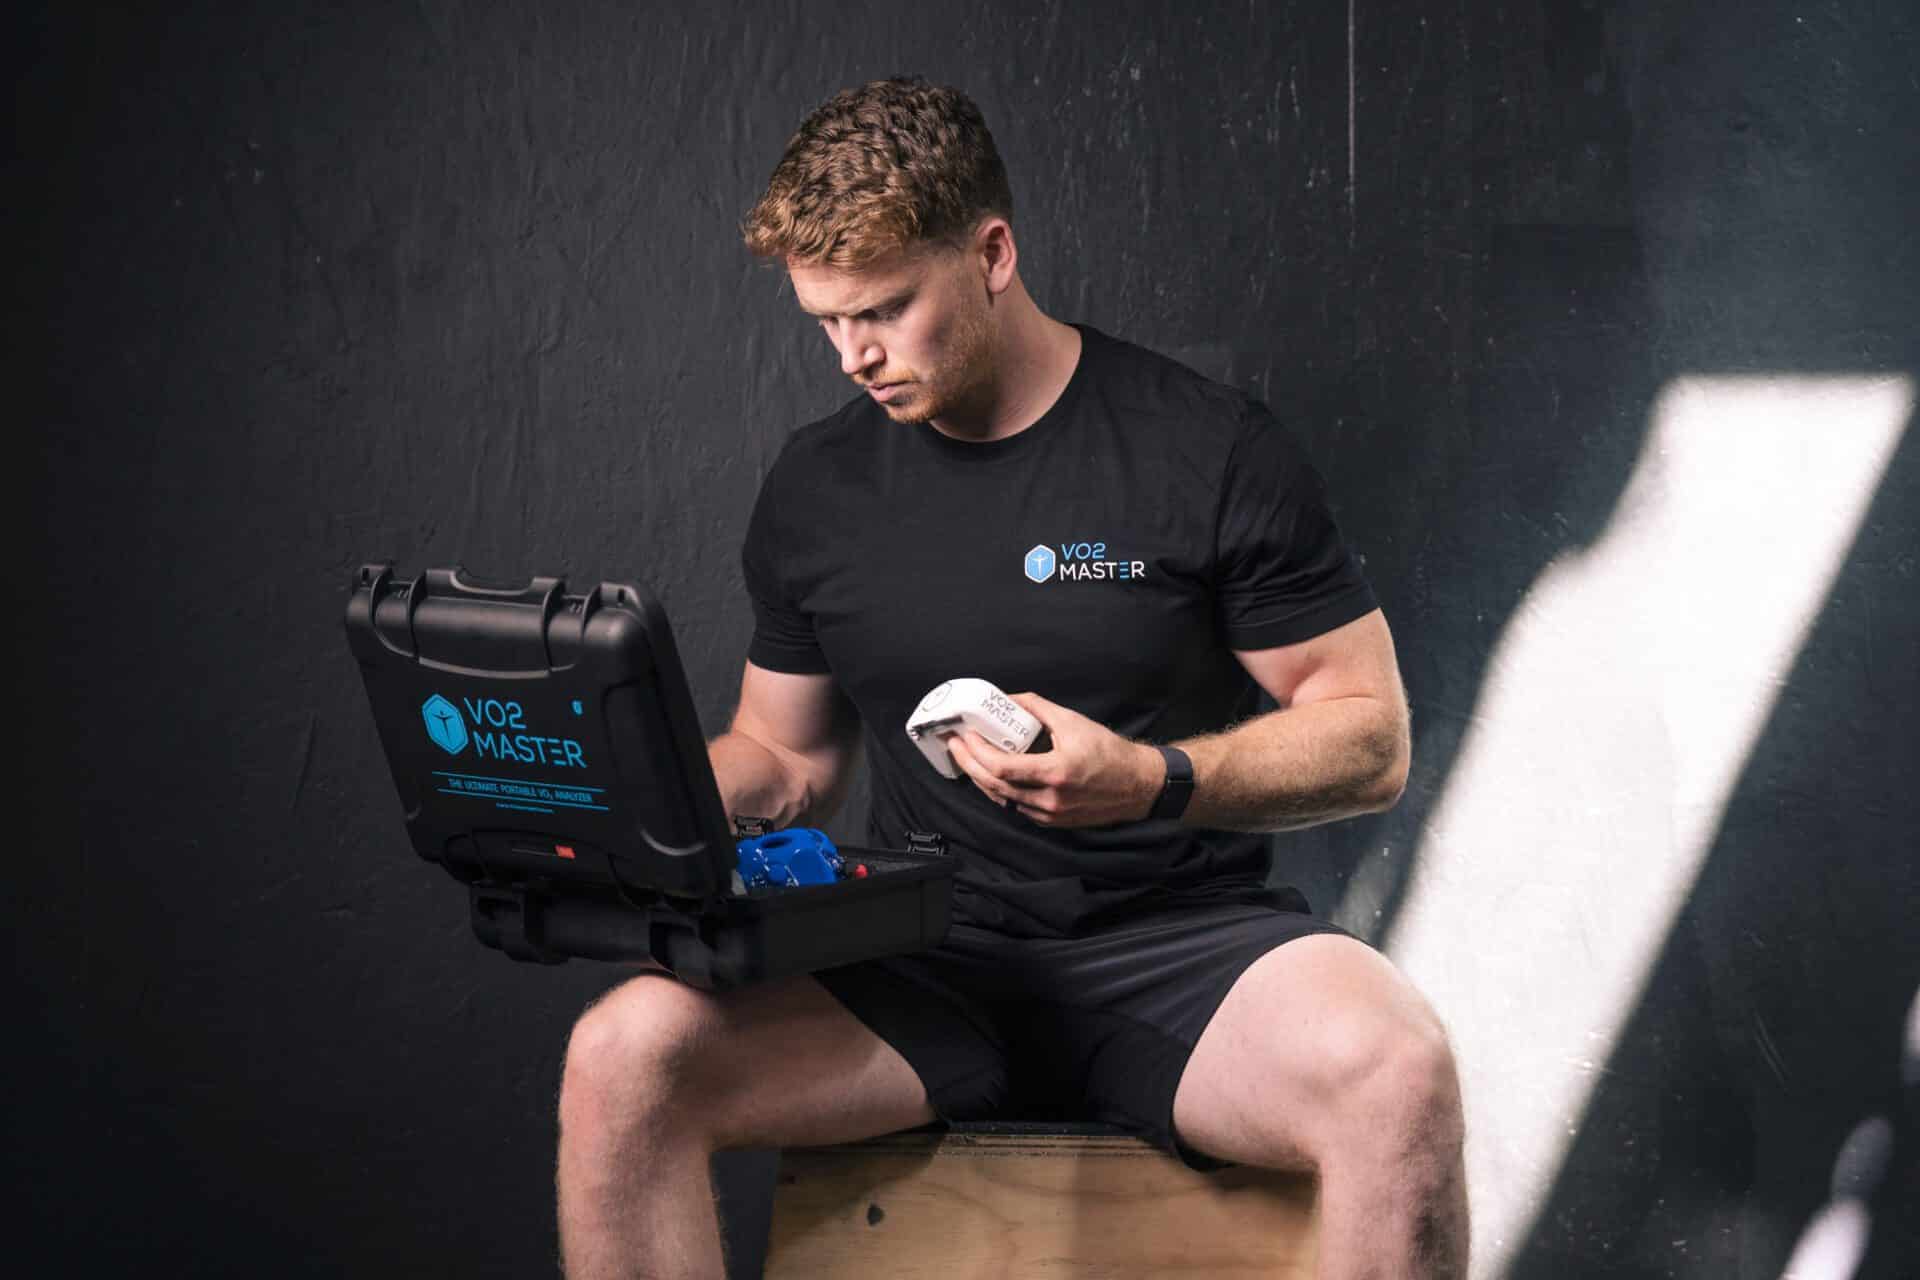 Male athlete opening the VO2 Master analyzer kit in a dark fitness facility